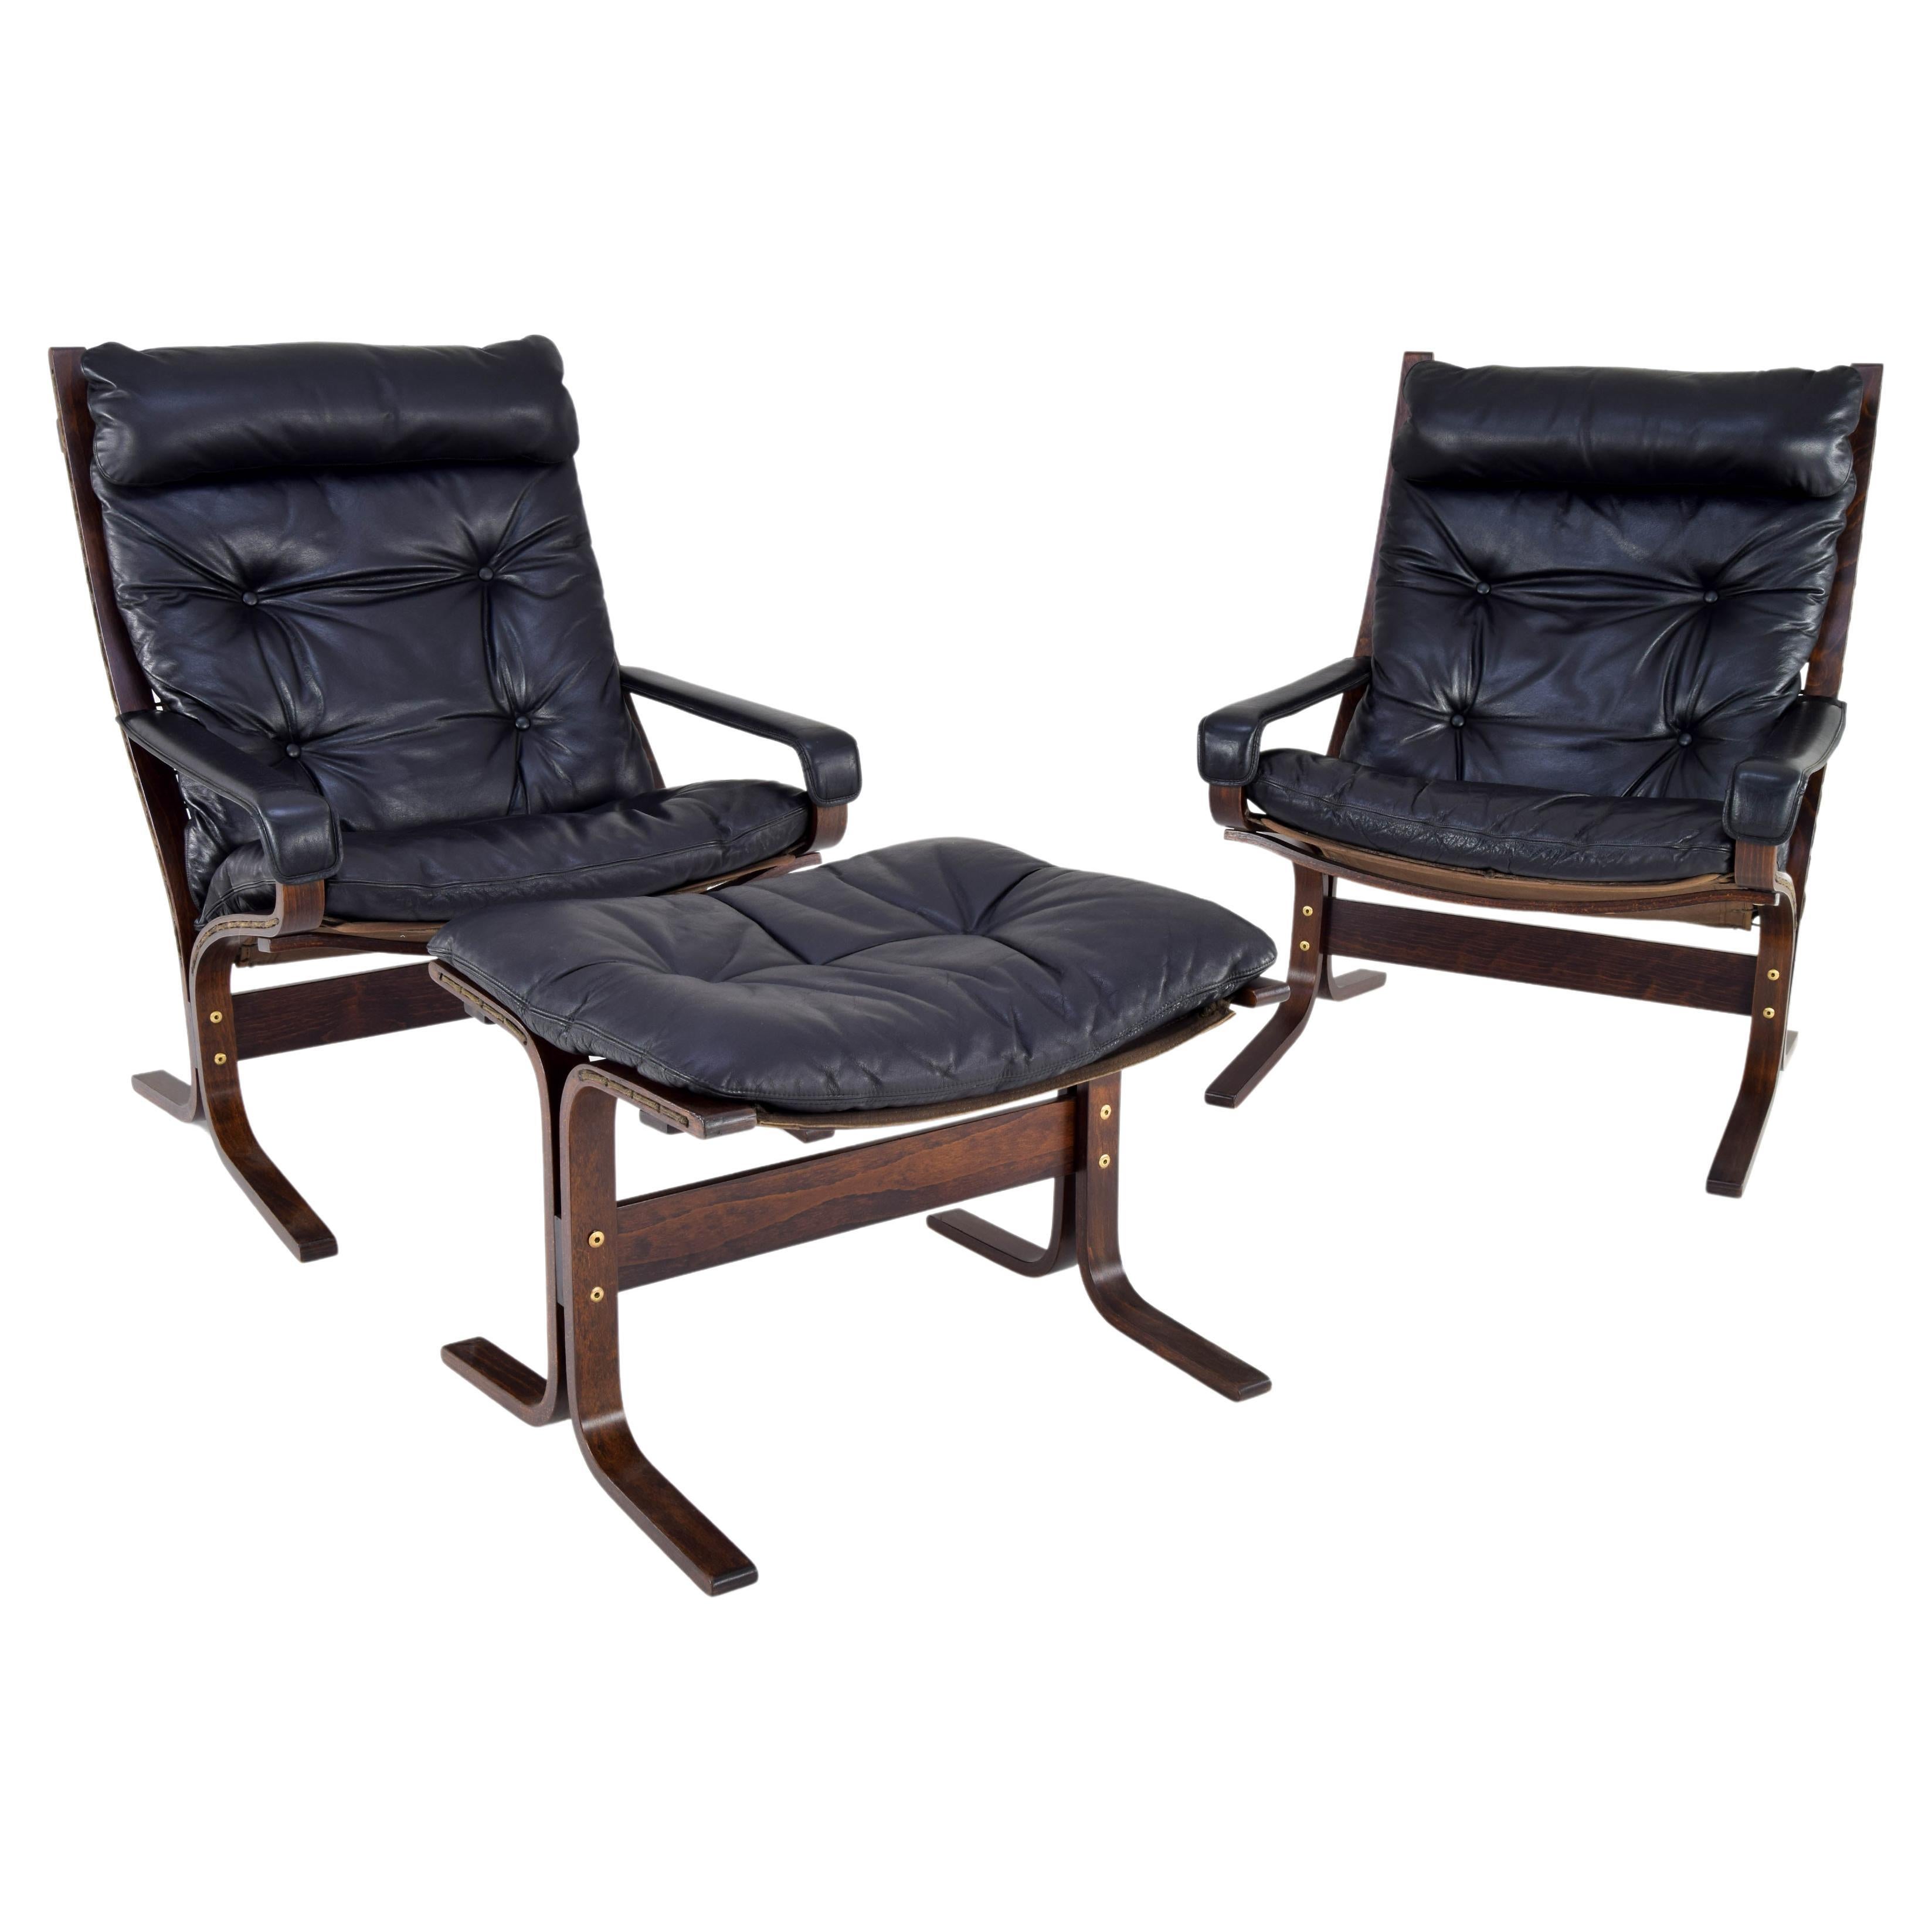 Pair of Siesta Leather Chairs and one Ottoman by Ingmar Relling for Westnofa